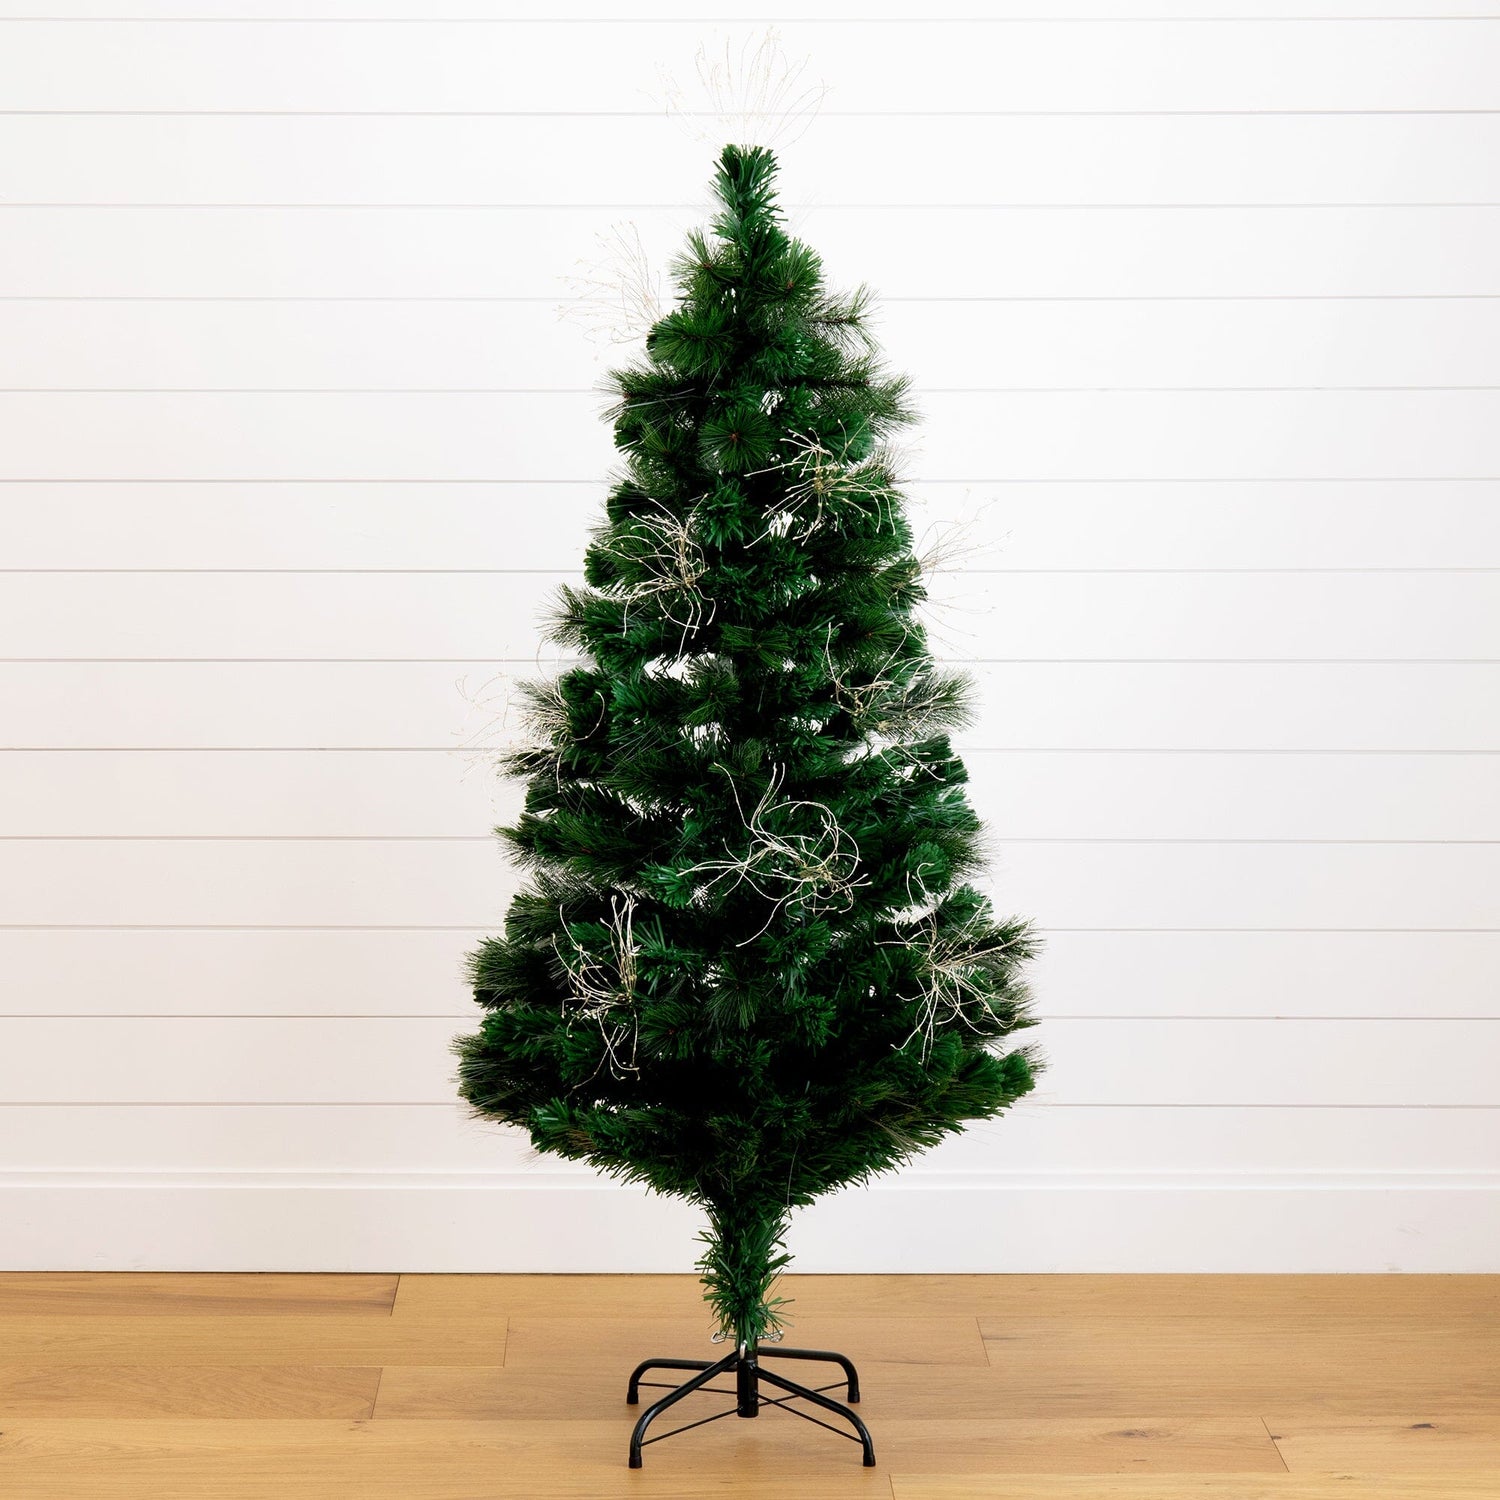 5' Pre-Lit Fiber Optic Artificial Christmas Tree with 146 Warm White LED Lights